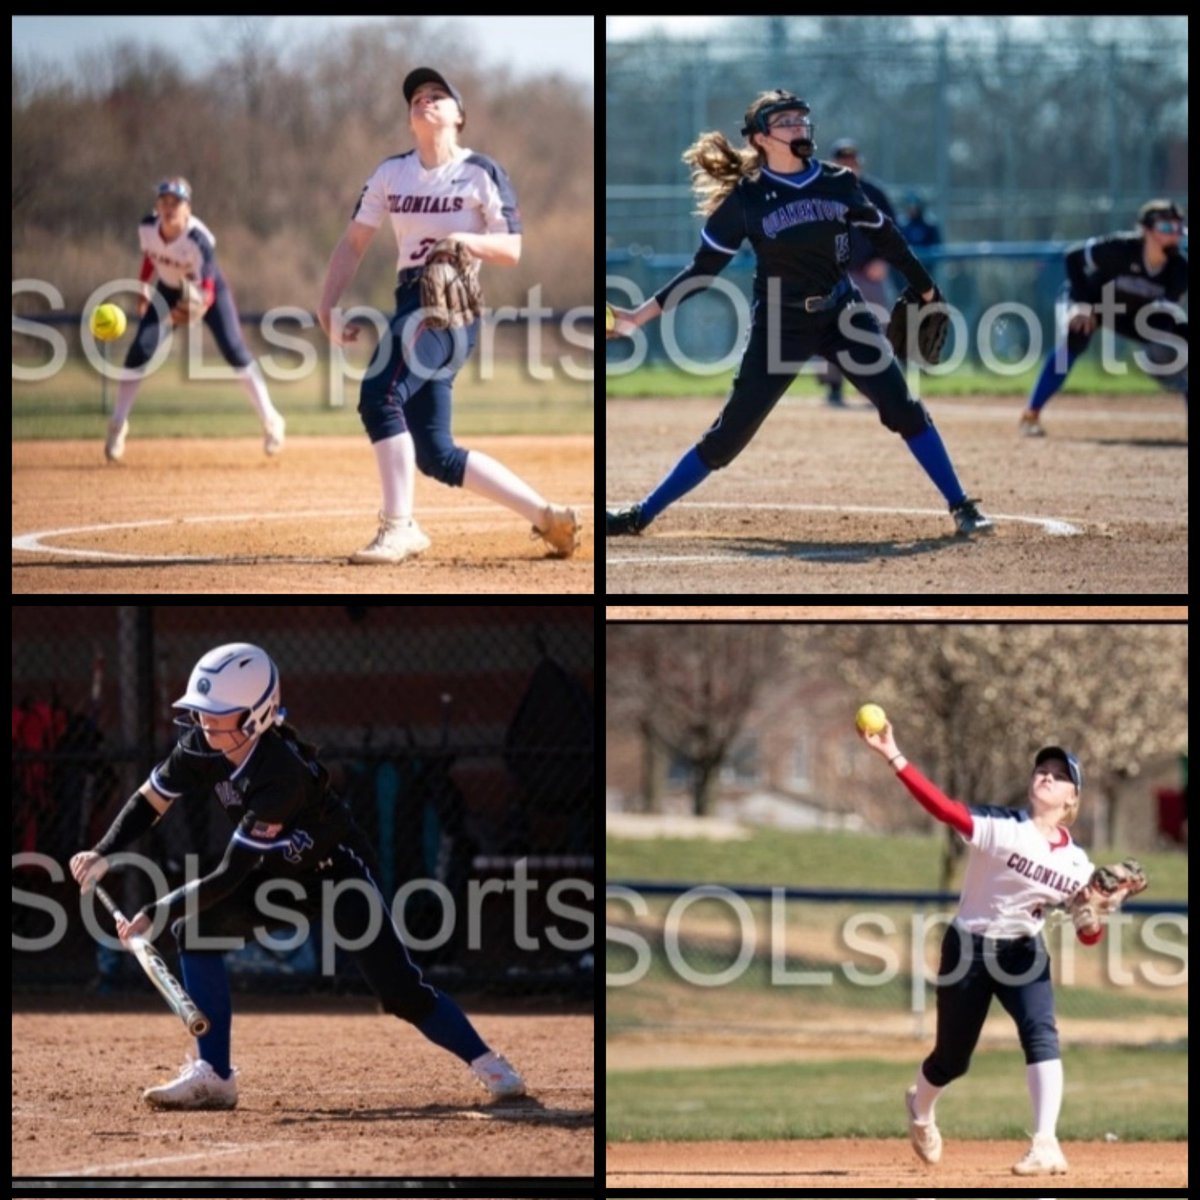 Photos from the @pw_softball vs @QCHSAthletics softball game are now available on @SOLsports galleries 

solsports.zenfolio.com/p1673468

#highschoolsoftball #sportsphotographer